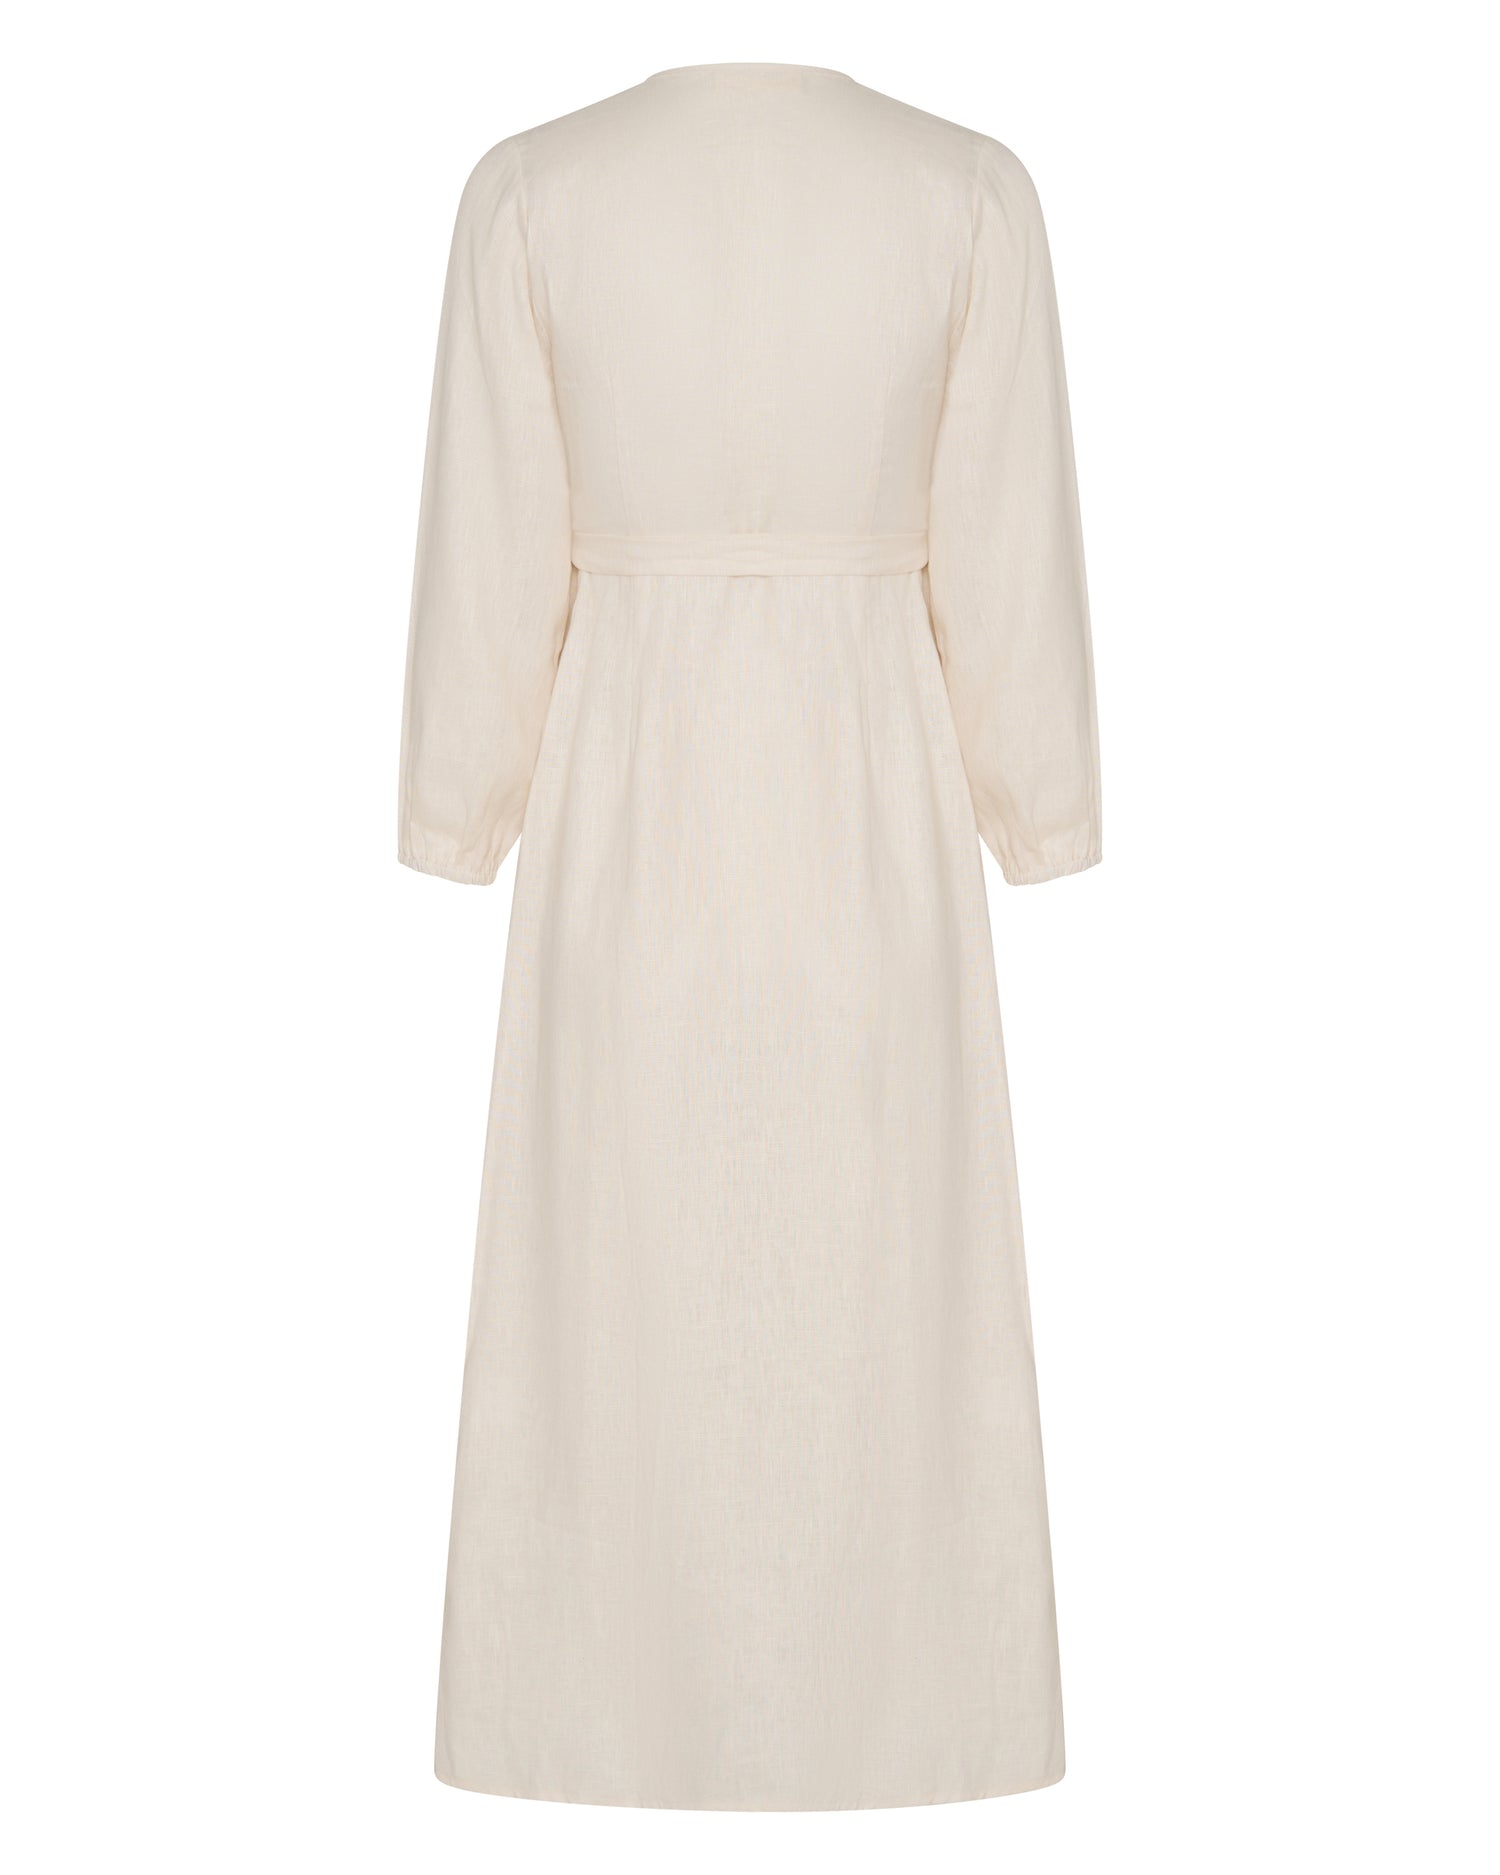 The front of a linen, off white wrap dress.